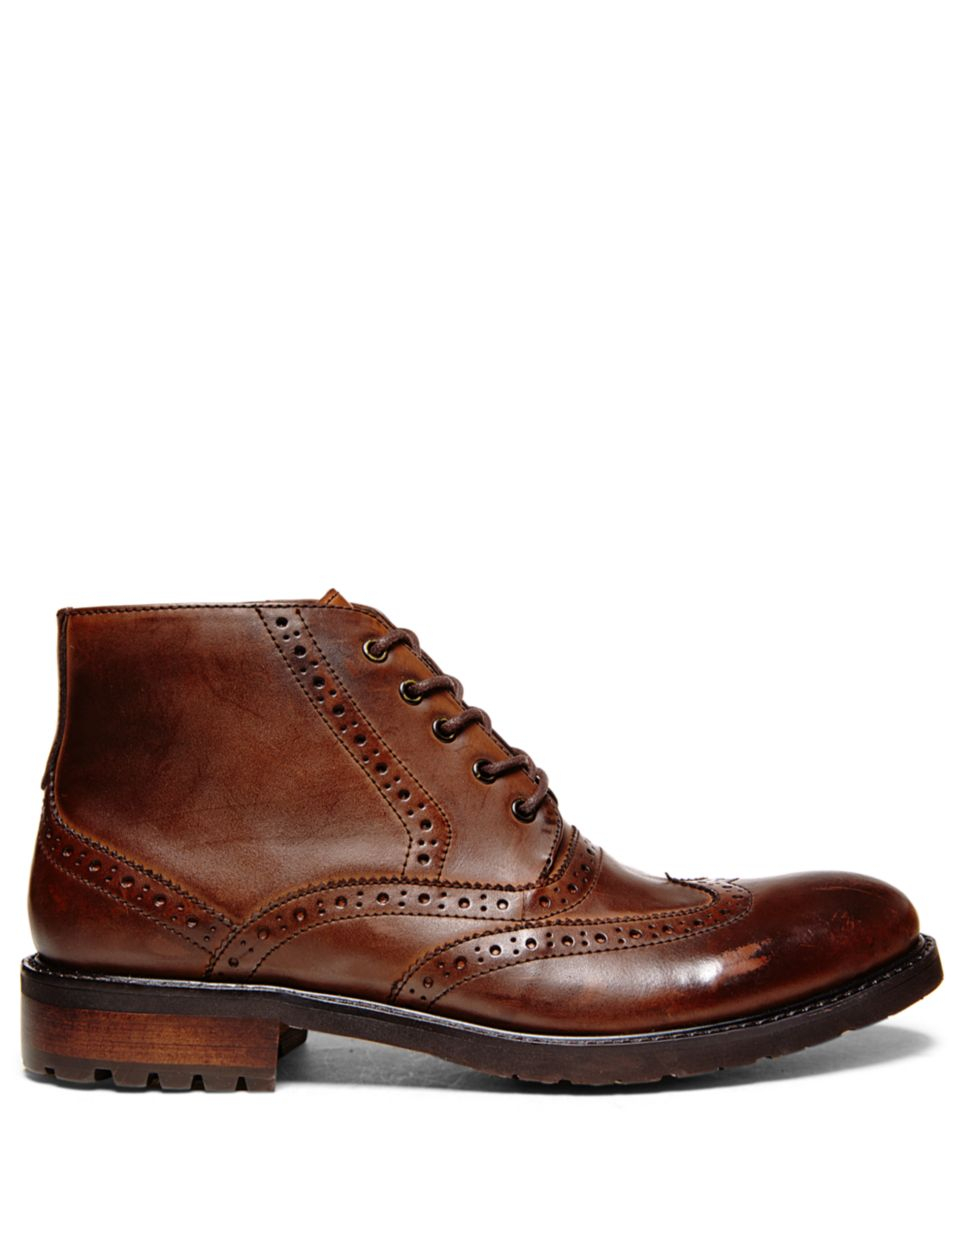 Steve Madden Leather Brogue Ankle Boots in Brown for Men